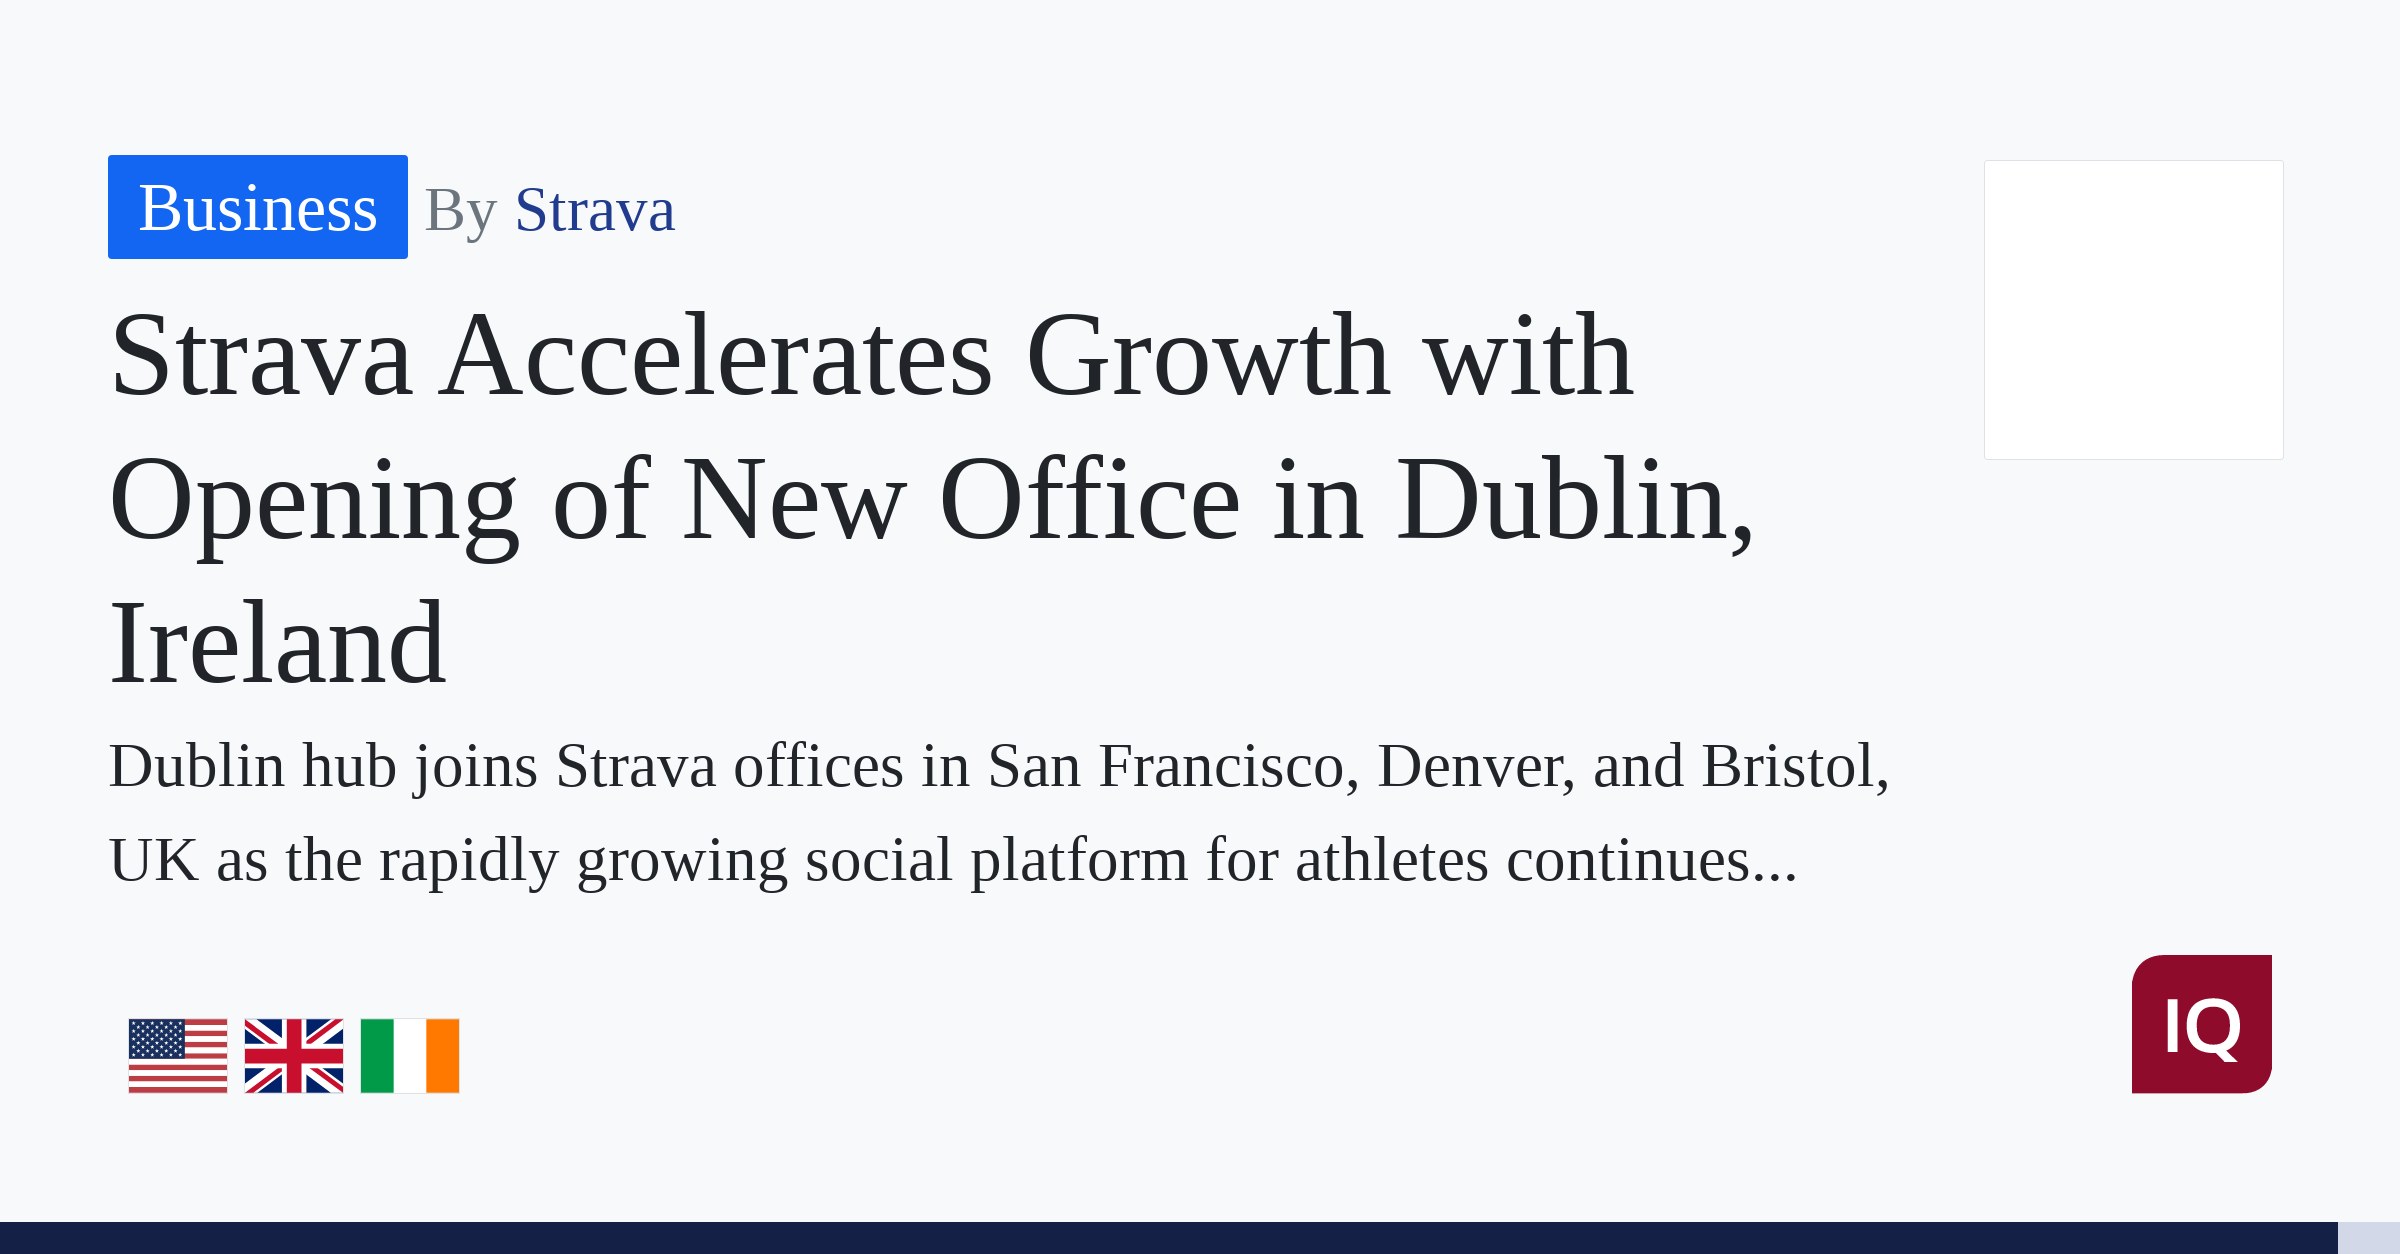 Strava Accelerates Growth with Opening of New Office in Dublin, Ireland